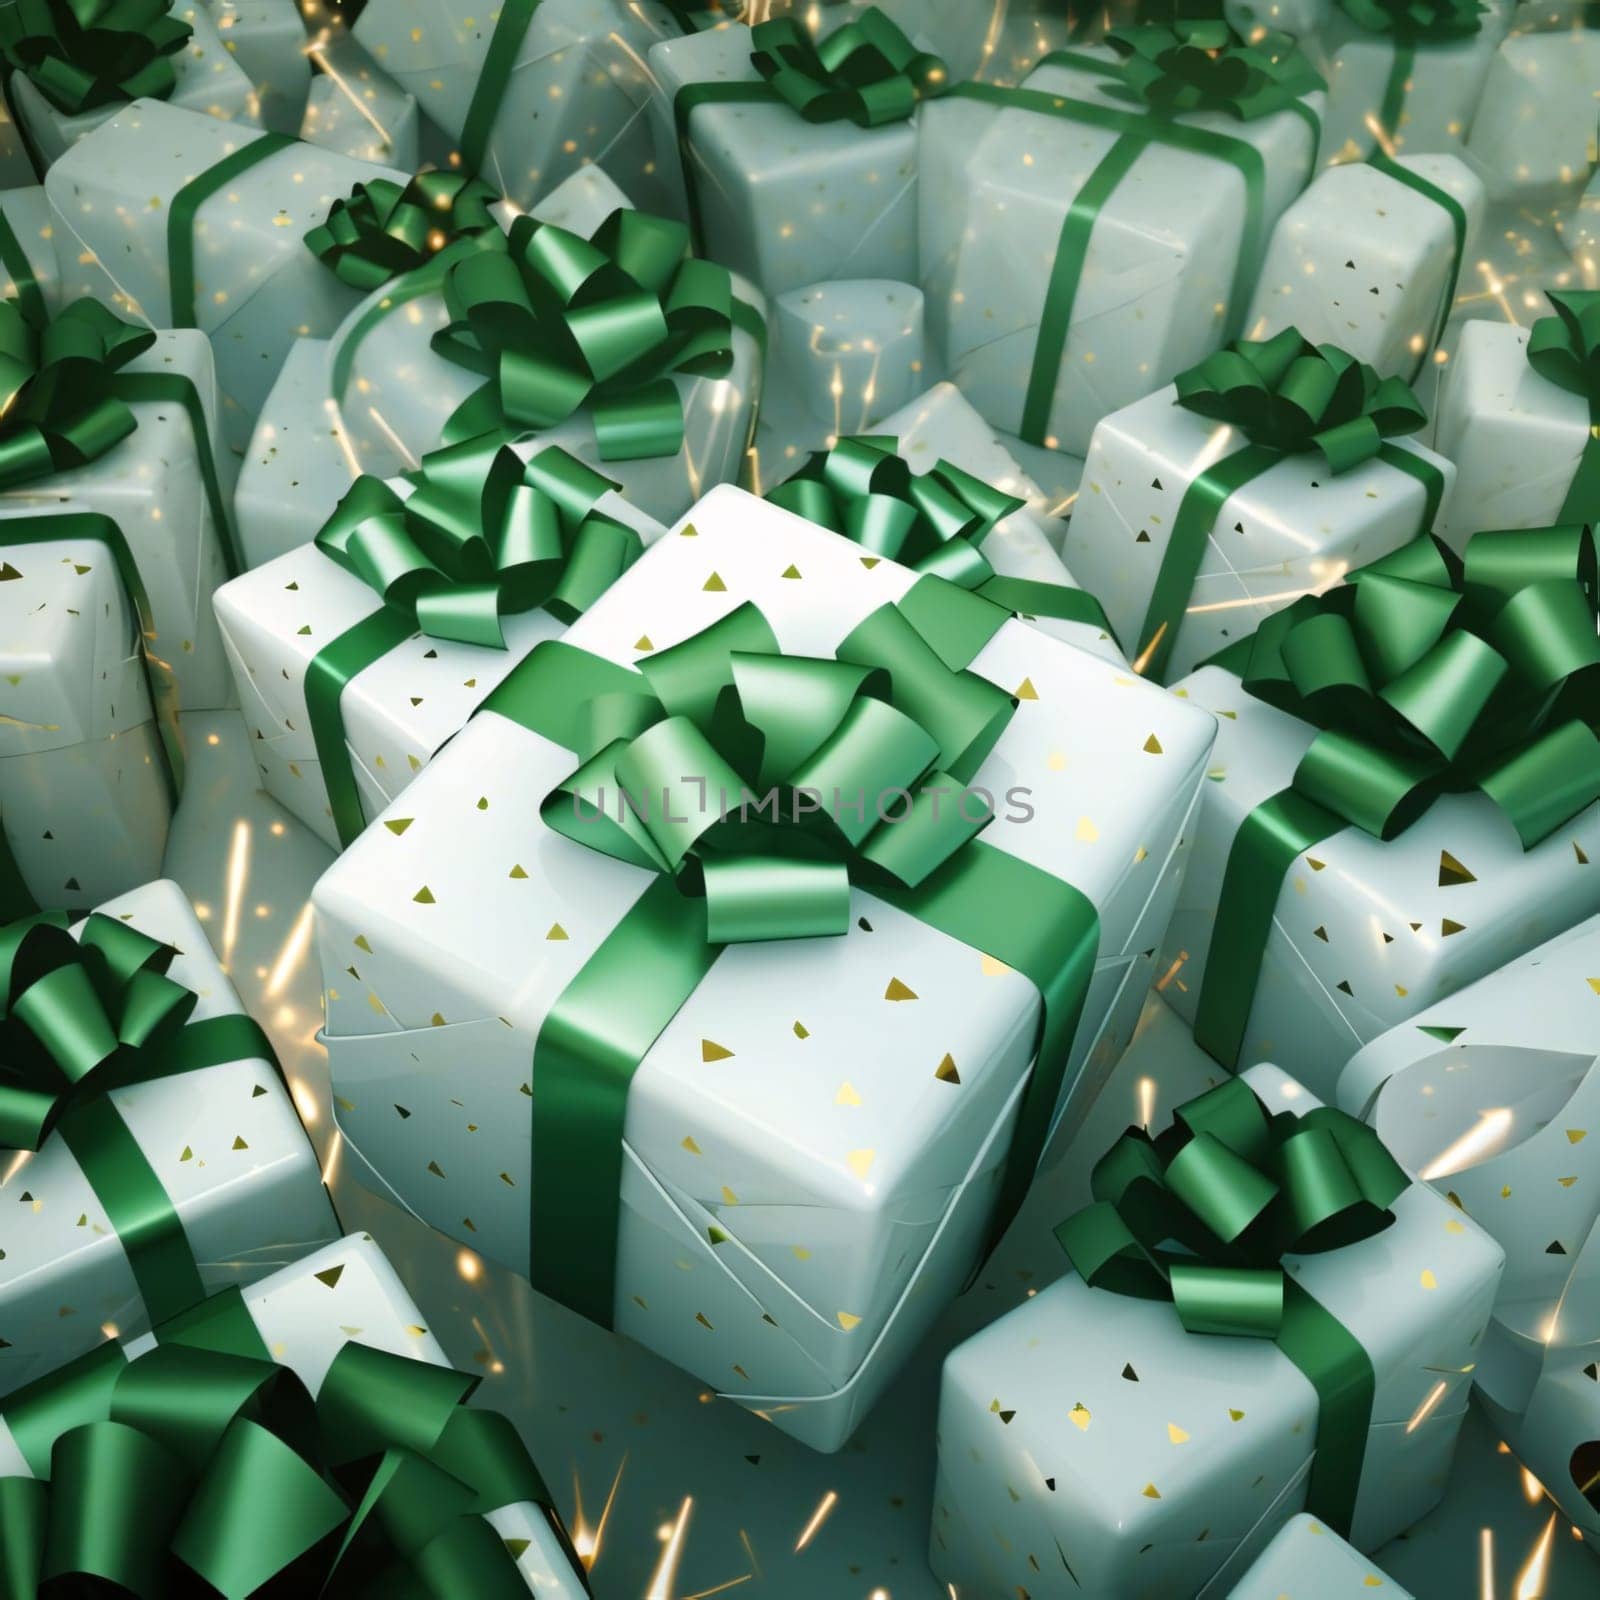 White gifts, boxes with green ribbons. Gifts as a day symbol of present and love. by ThemesS